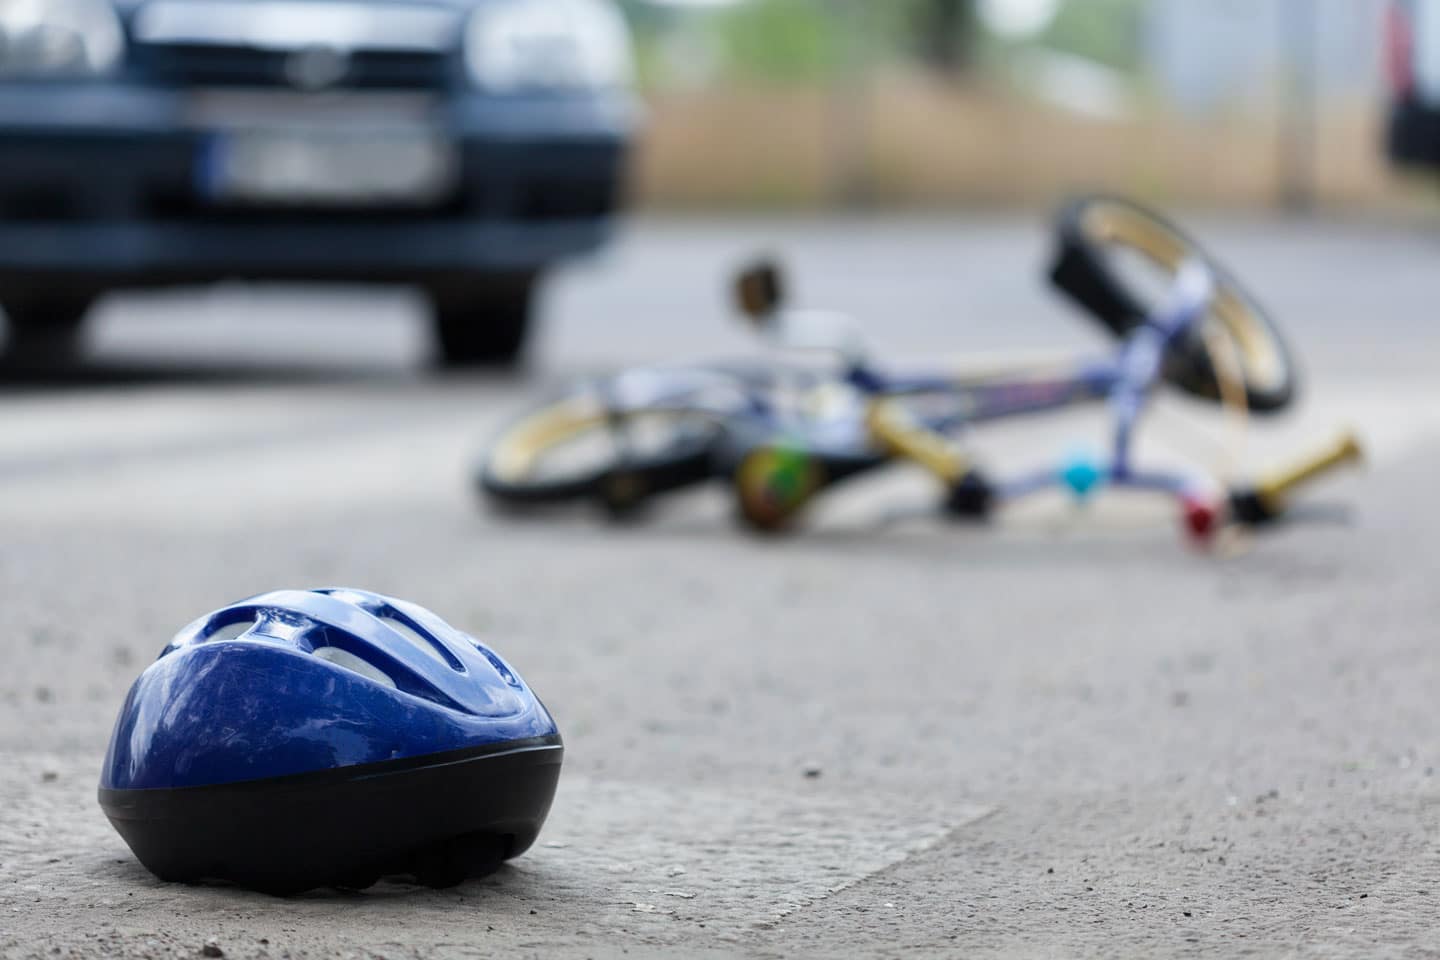 Dehoyos Injury Bicycle Accidents in Texas: What to Do After the Crash